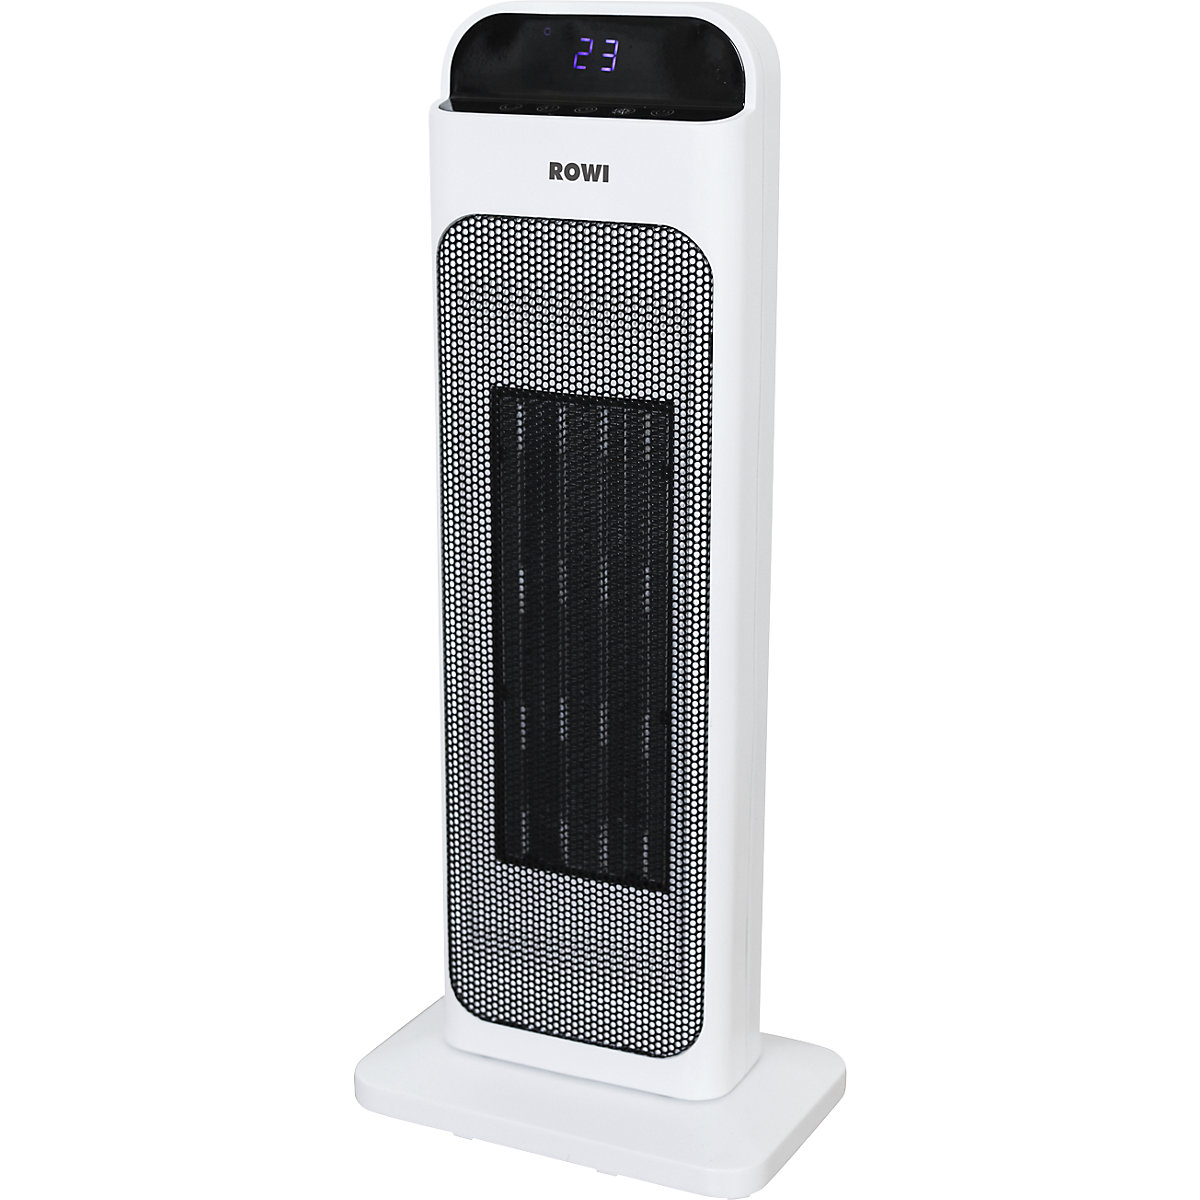 Ceramic tower fan heater with remote control